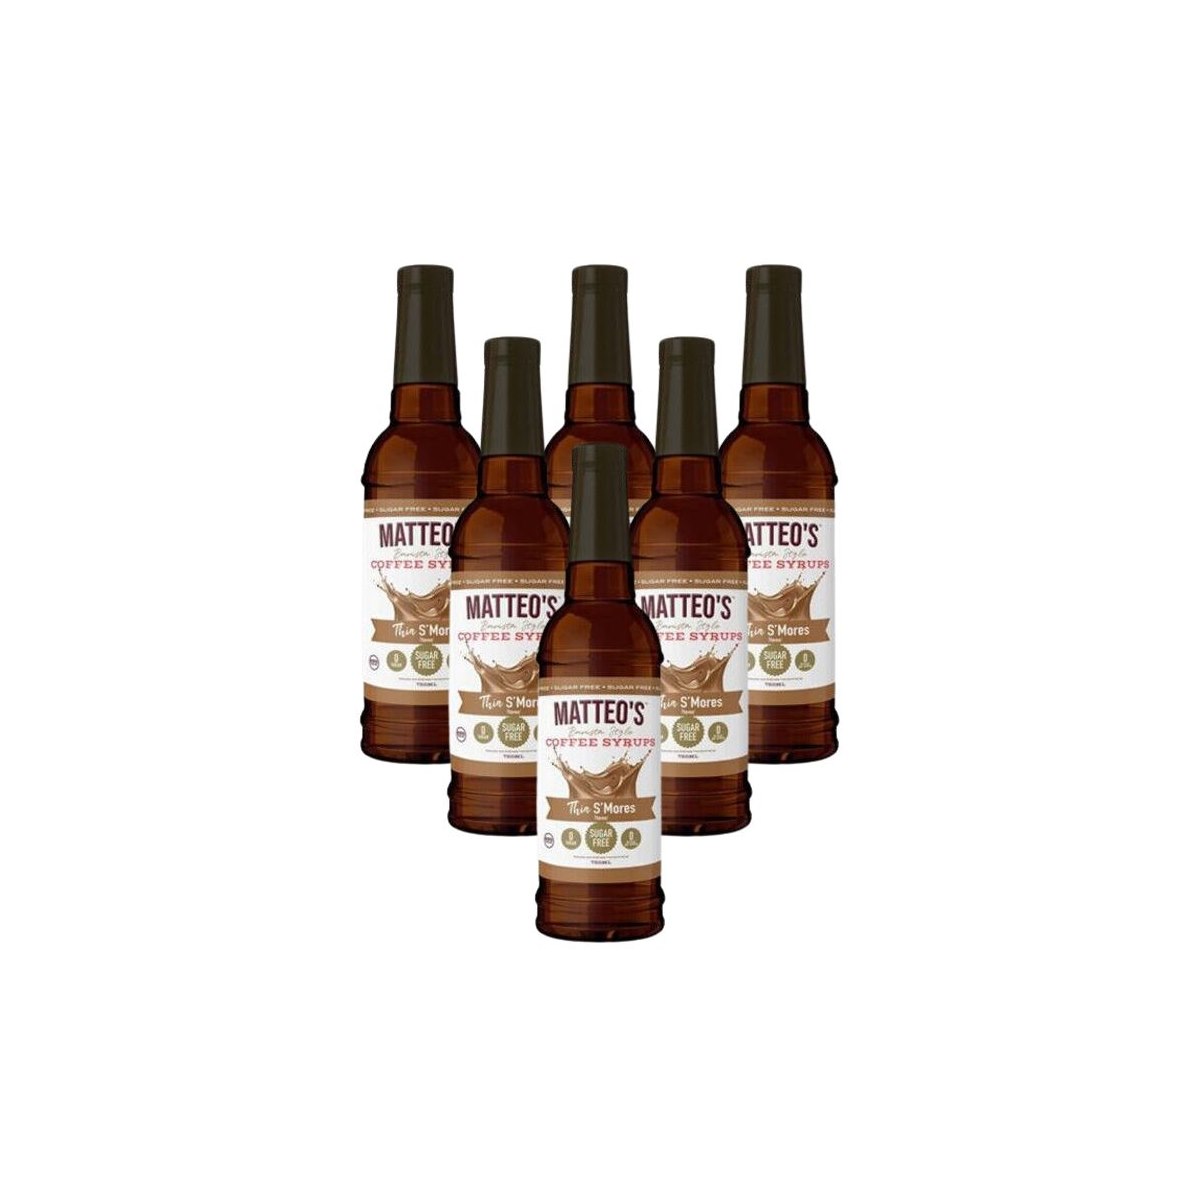 Case of 6 x Matteos Thin S'mores 750ml